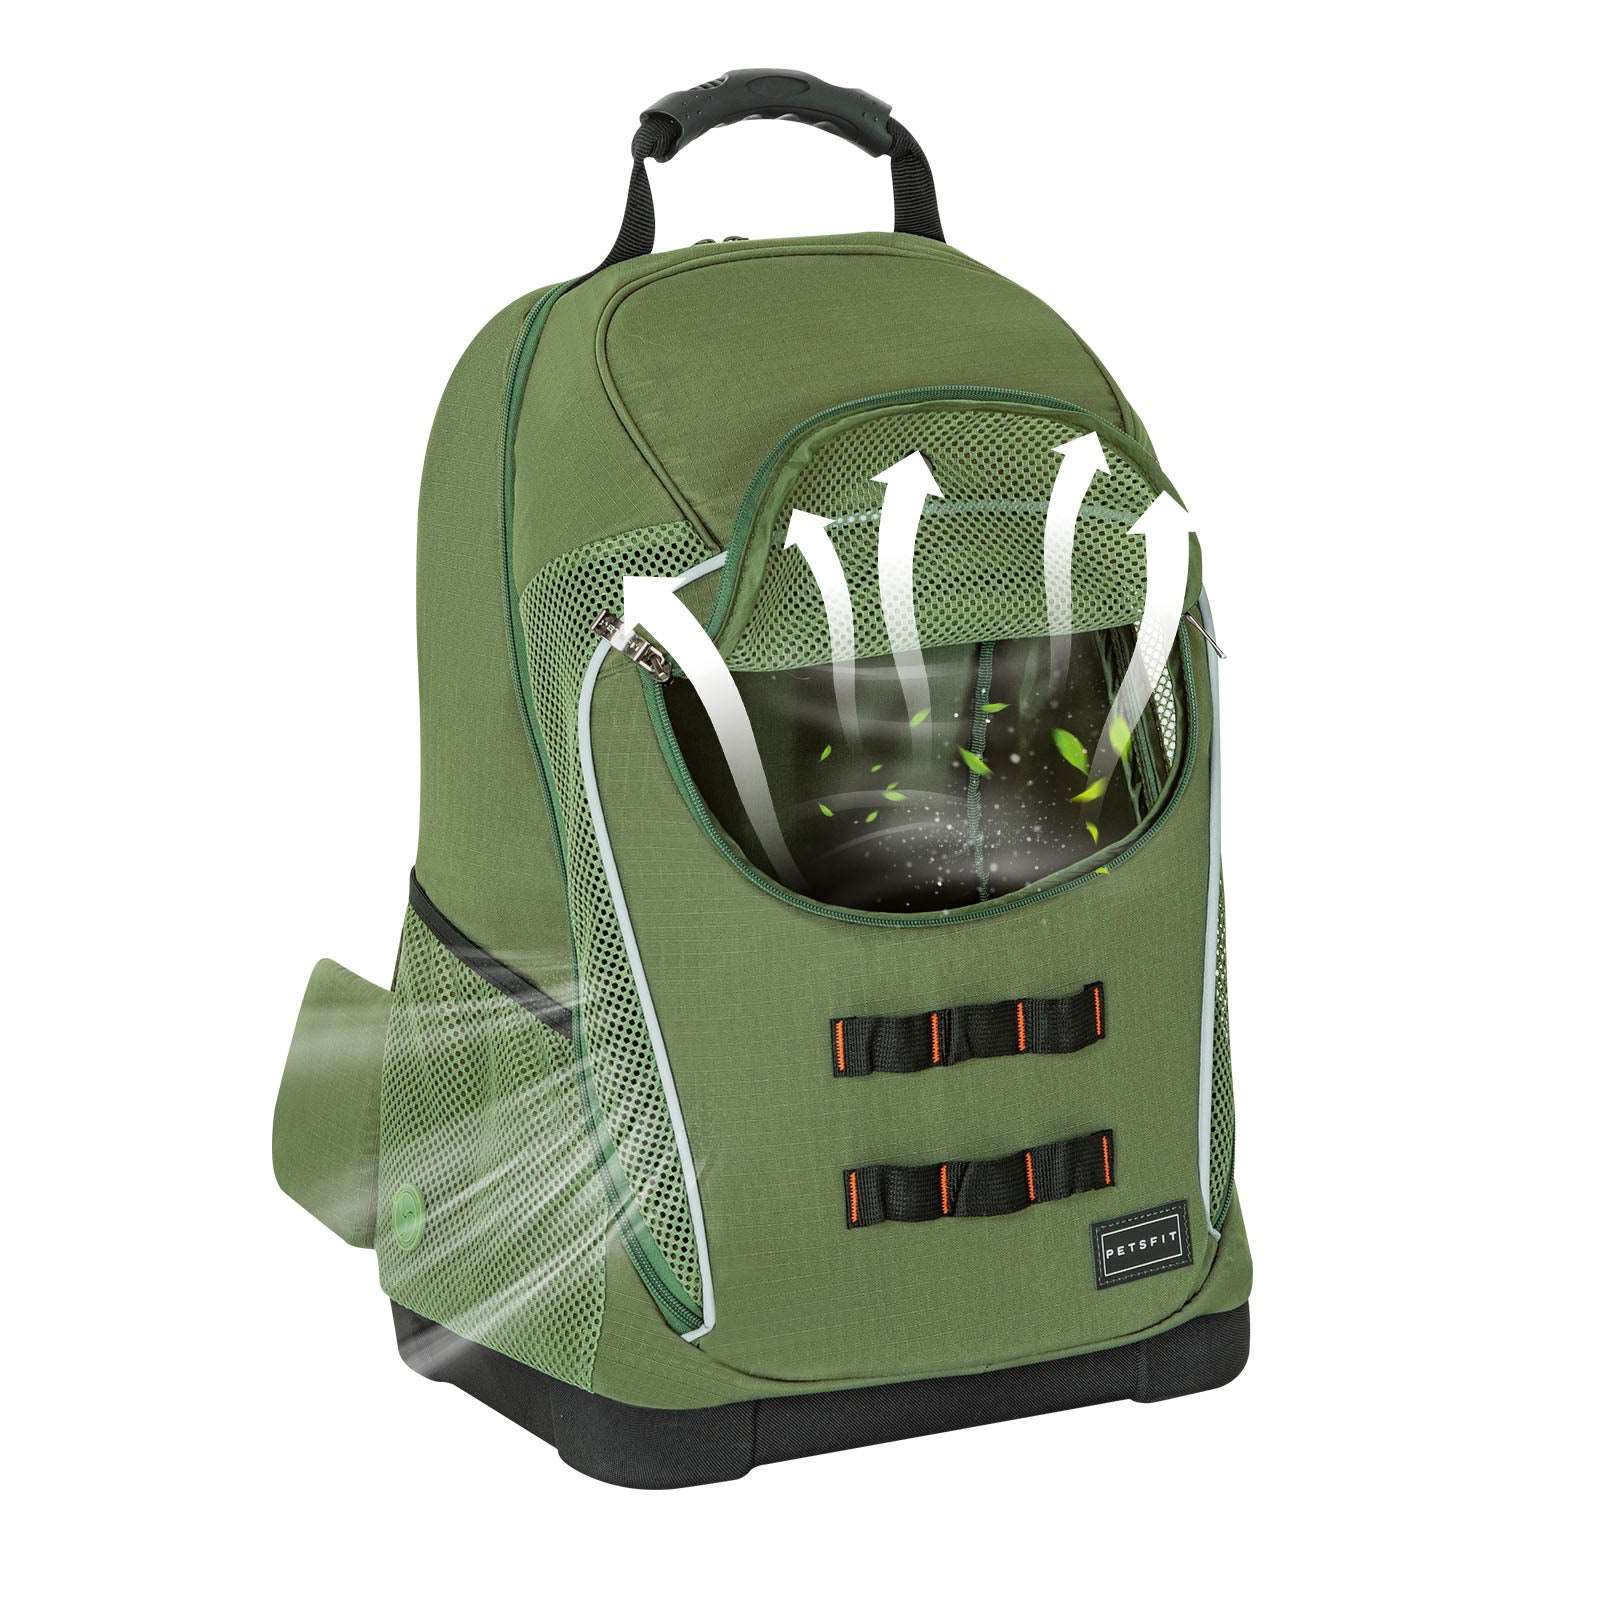 petsfit-pet-dog-carrier-latest-backpack-with-upgraded-weight-reduction-design-06